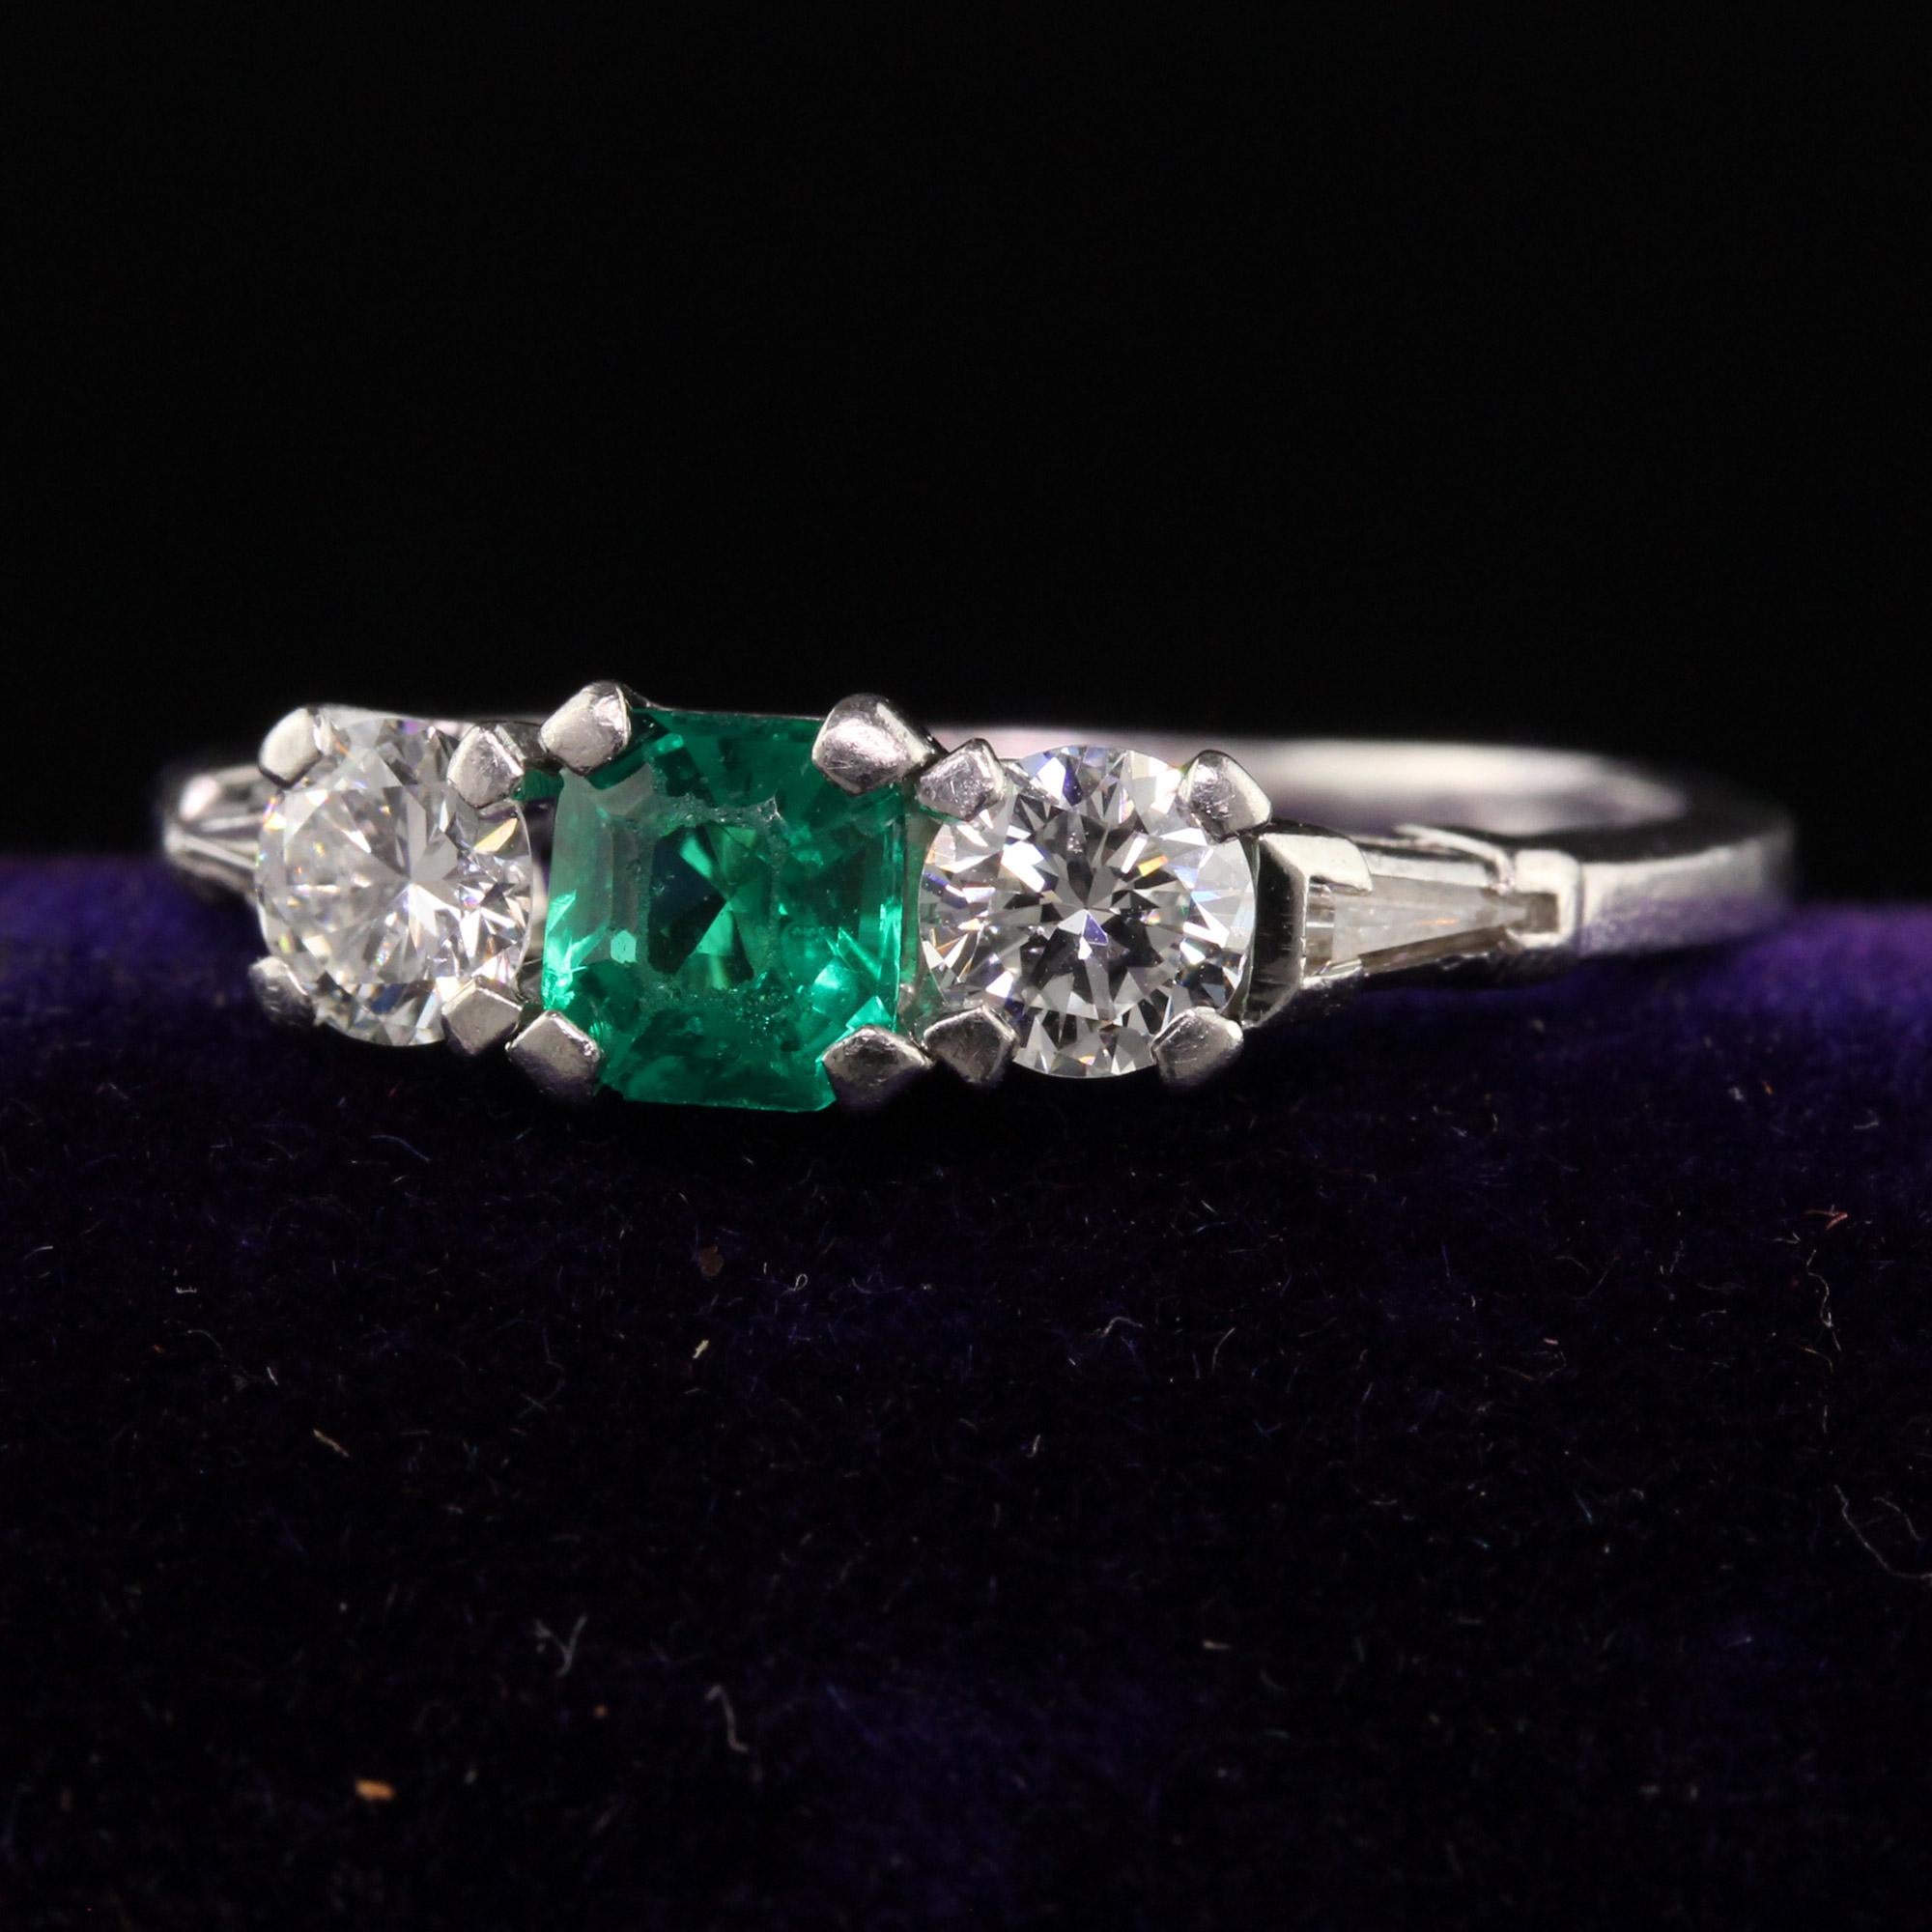 Beautiful Retro Vintage Peacock Platinum Diamond and Emerald Three Stone Ring. This beautiful band was made by C.D Peacock in the 1950's/60s and it is crafted in platinum with transitional cut diamonds on either side of a glowing green